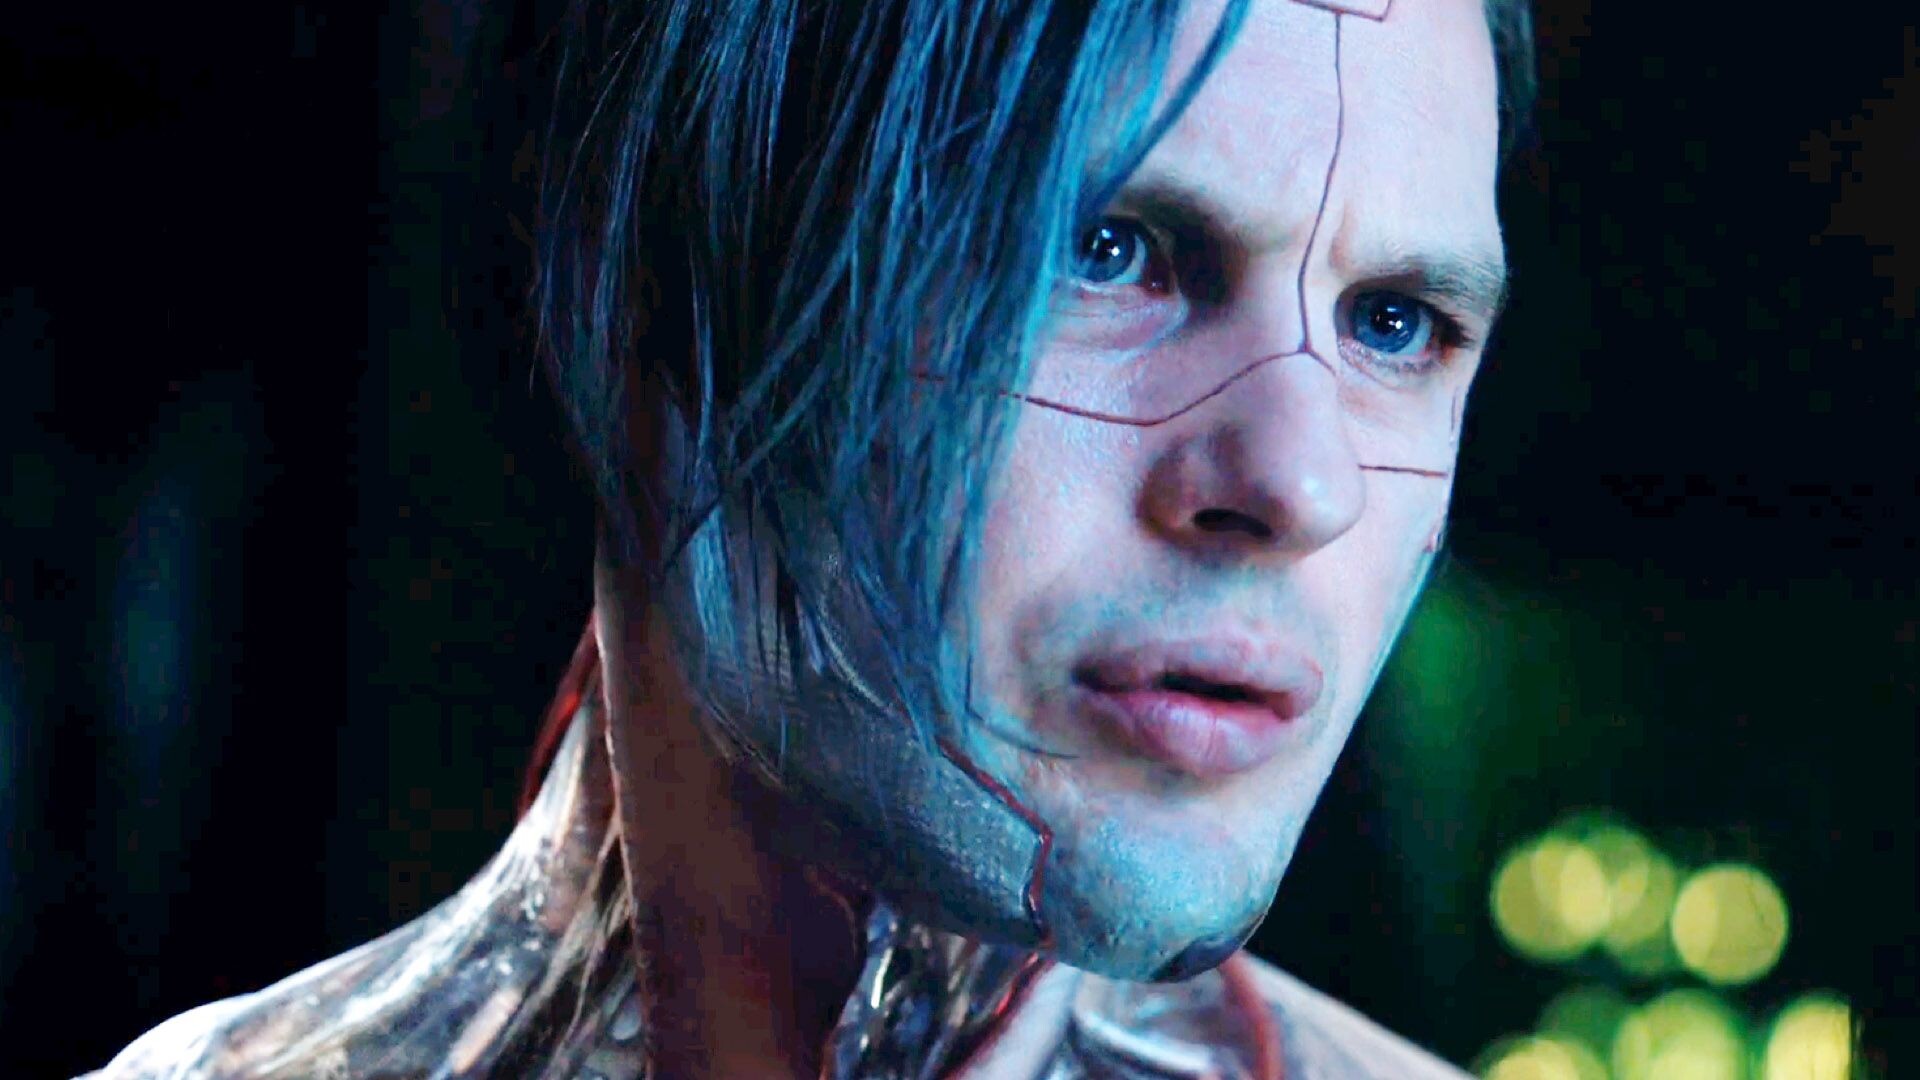 Ghost in the Shell (Movie): Michael Carmen Pitt as Kuze and Hideo, An architect and a member of the Individual Eleven terrorist group. 1920x1080 Full HD Wallpaper.